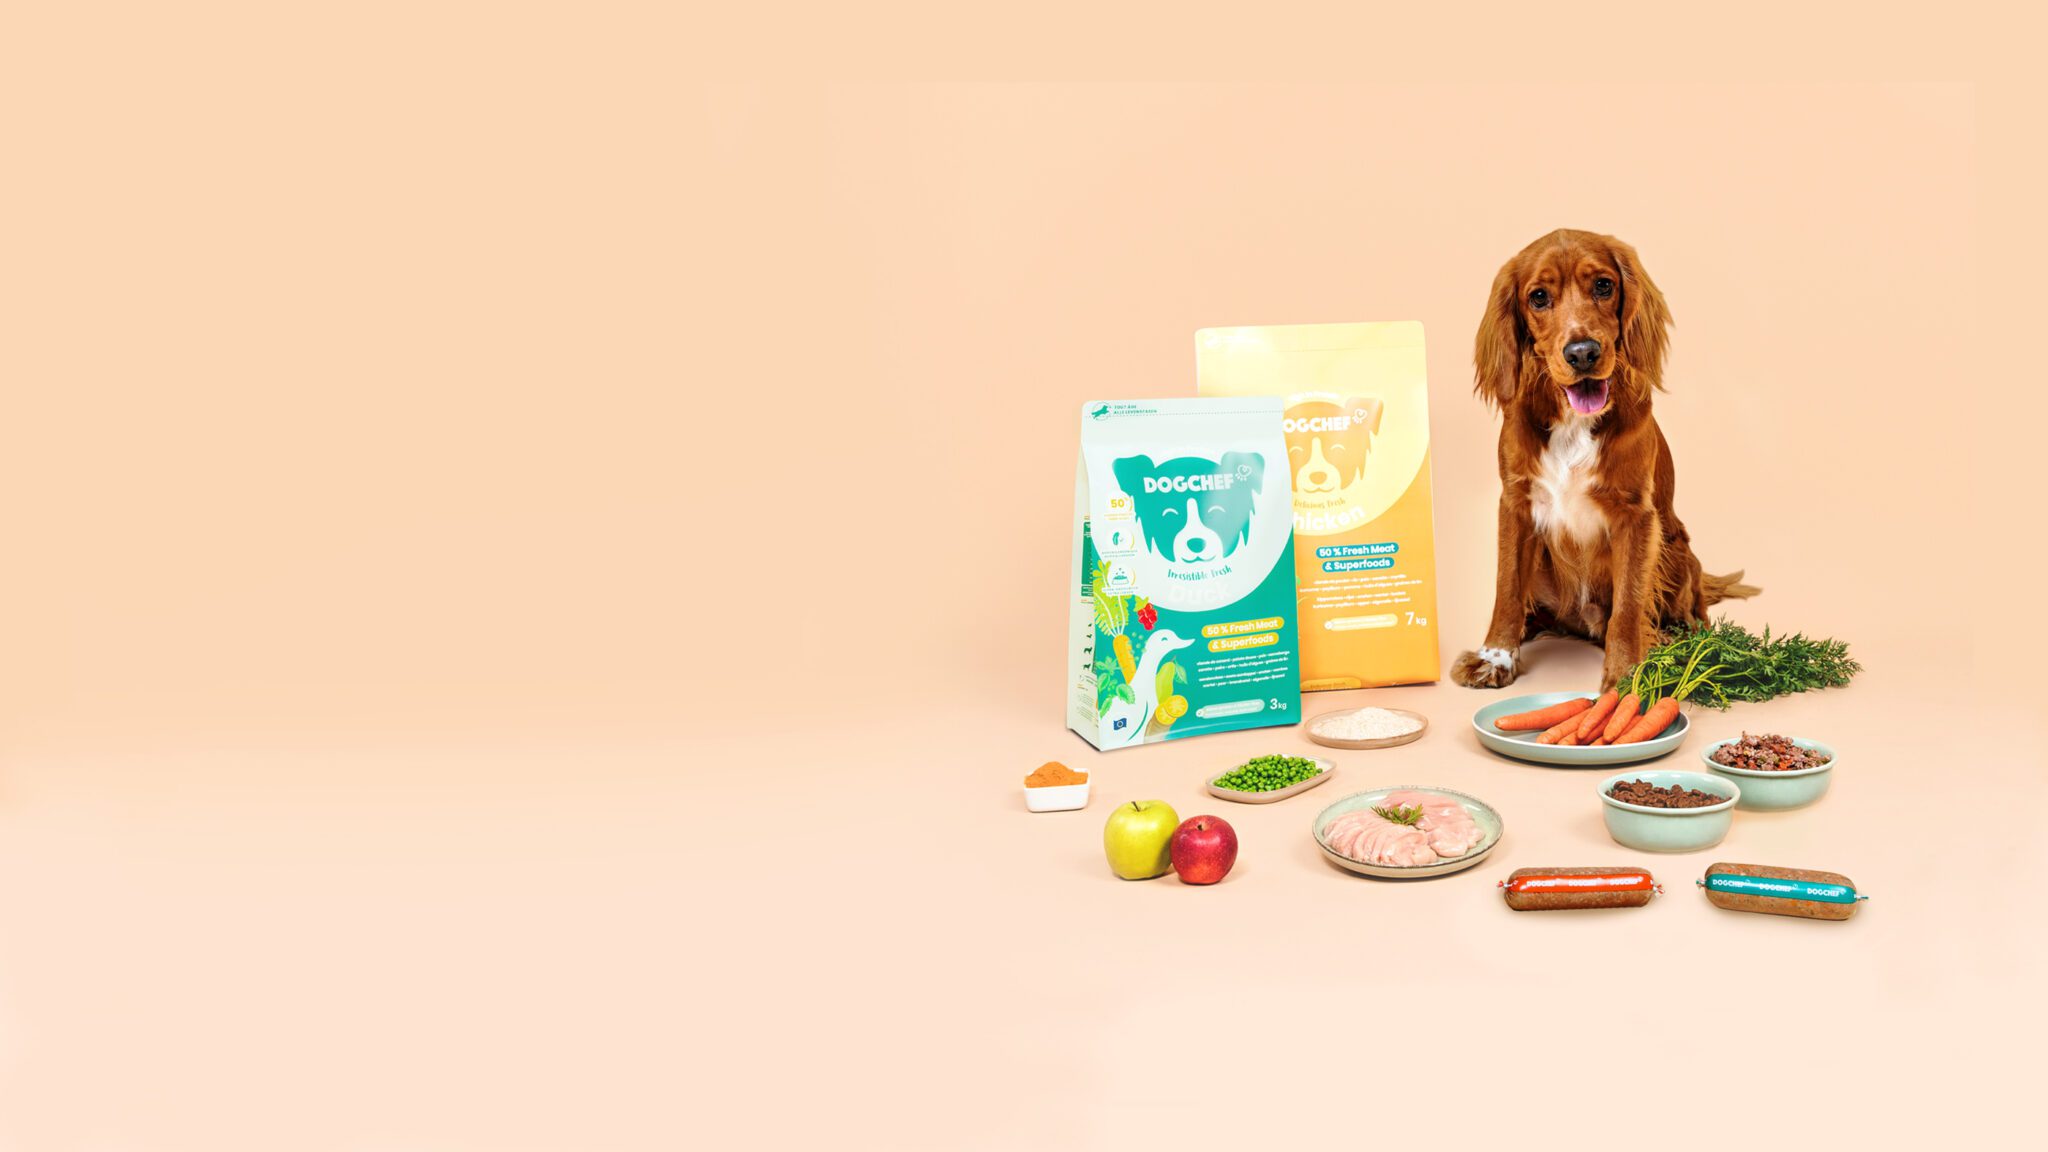 Dog Chef - Fresh Meals For Dogs, Cooked with 100% Natural Ingredients